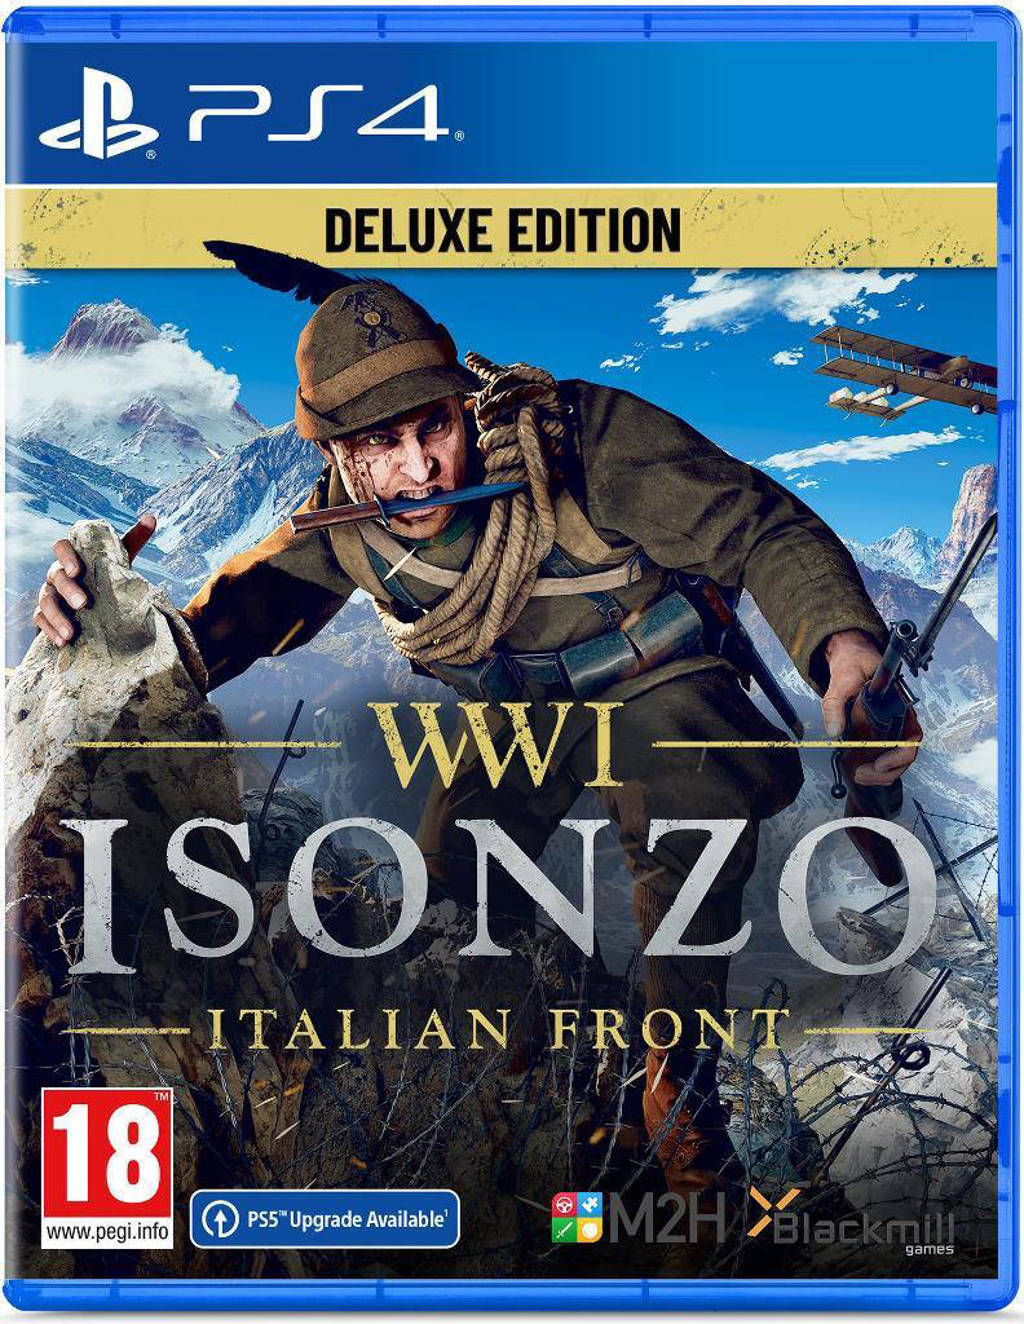 WWI Isonzo - Italian Front - Deluxe Edition (PlayStation 4)